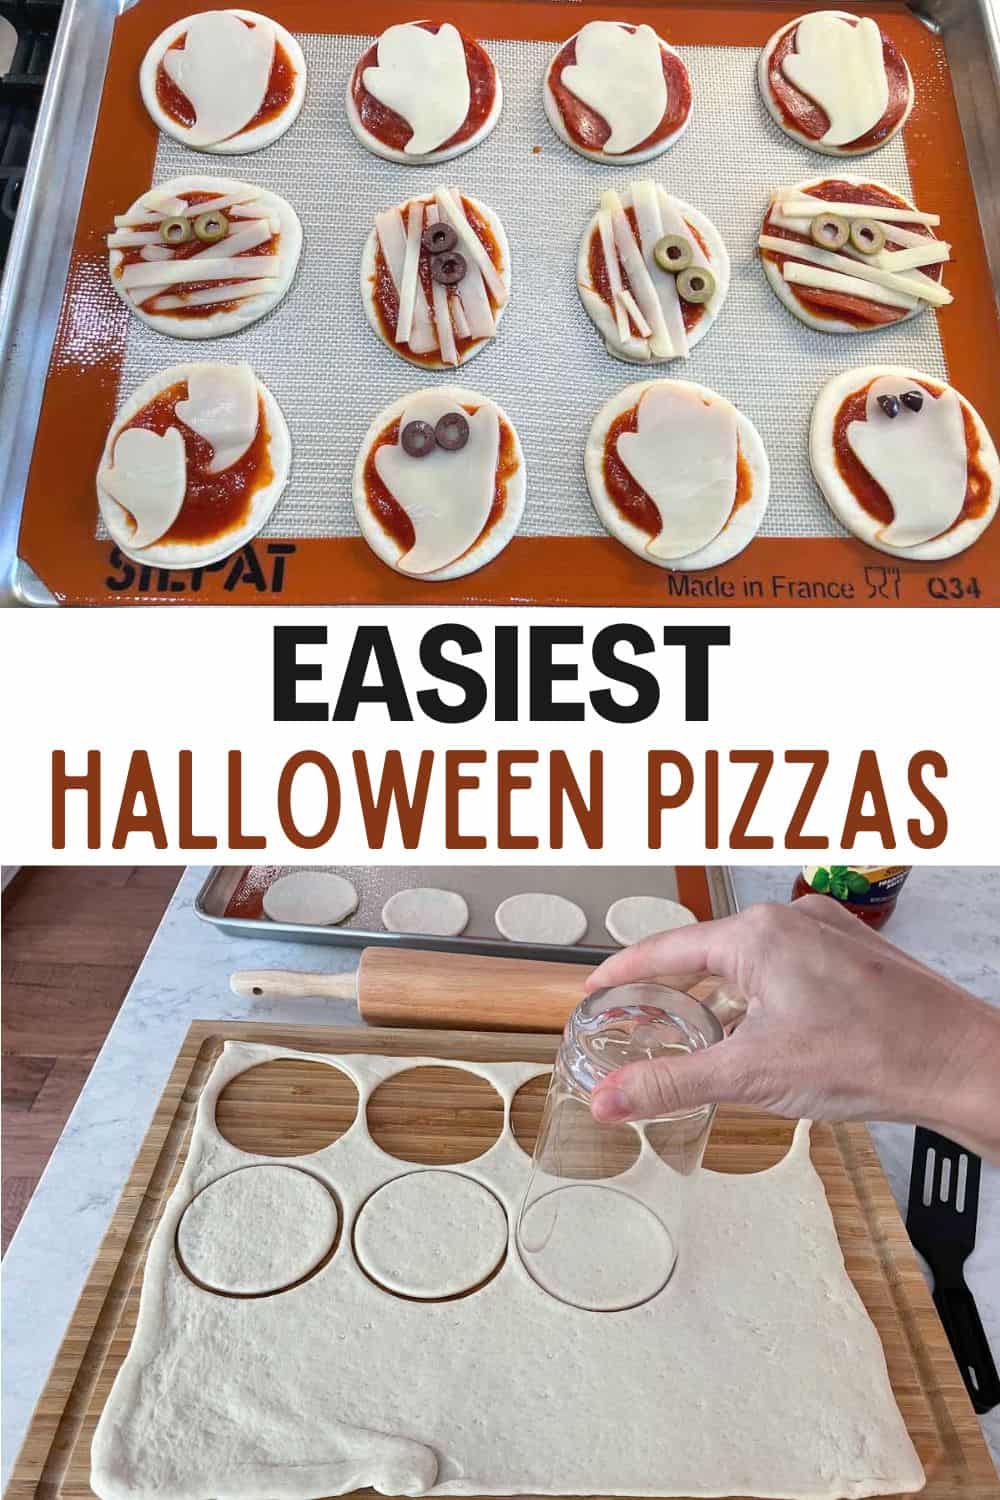 These fun and spooky Halloween mini pizza treats are a big hit for kids, adults, and ghouls alike! You only need 5 ingredients and less than 15 minutes!